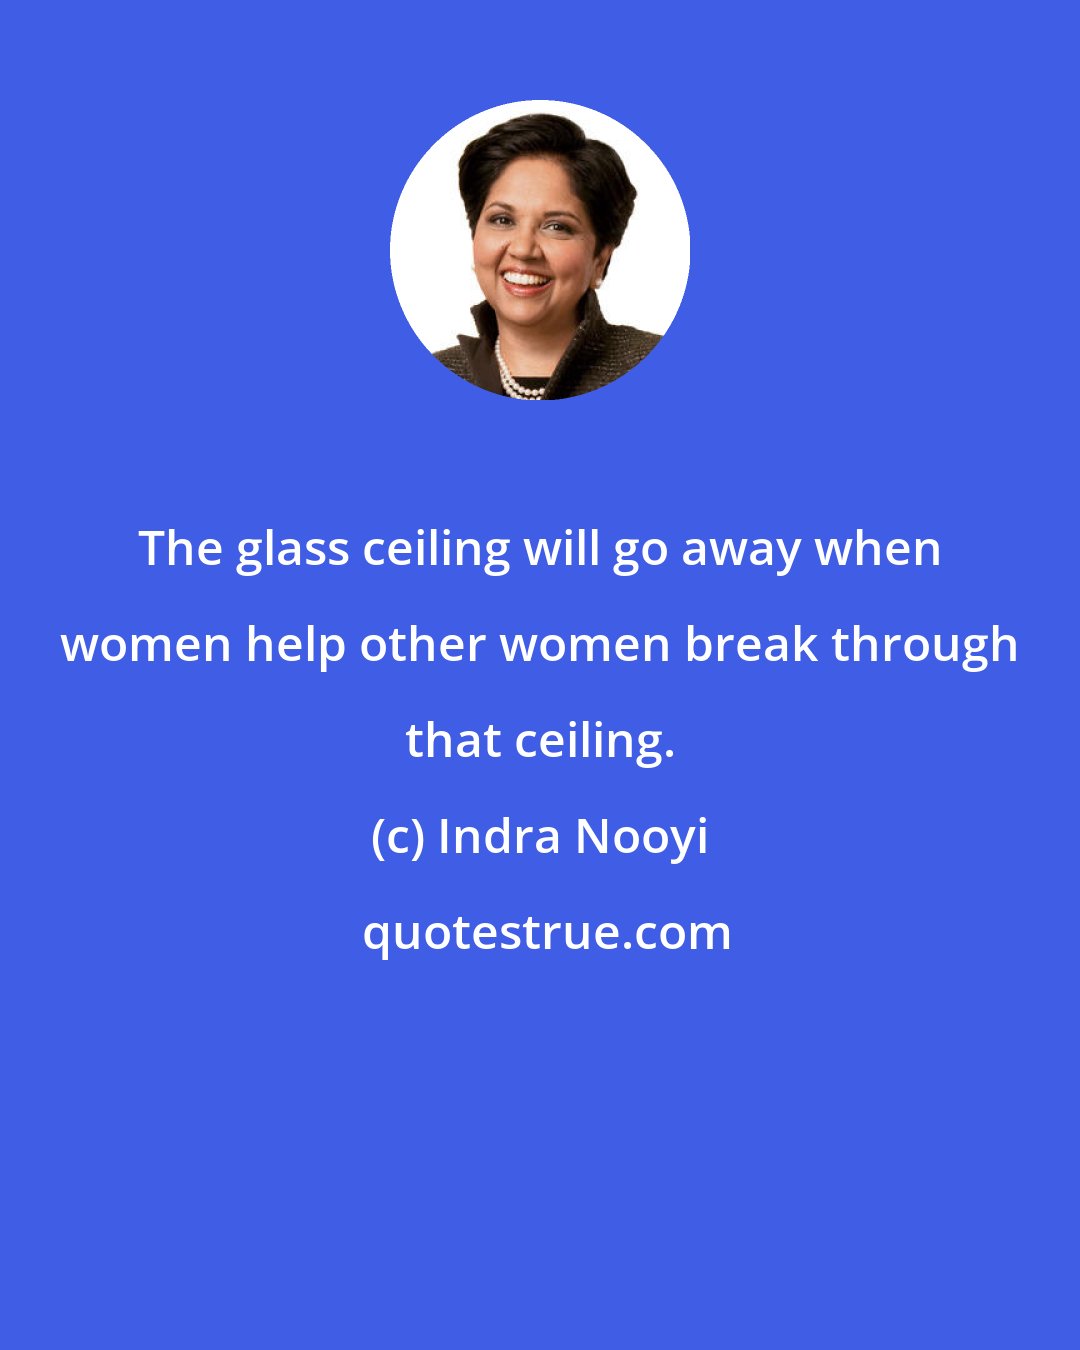 Indra Nooyi: The glass ceiling will go away when women help other women break through that ceiling.